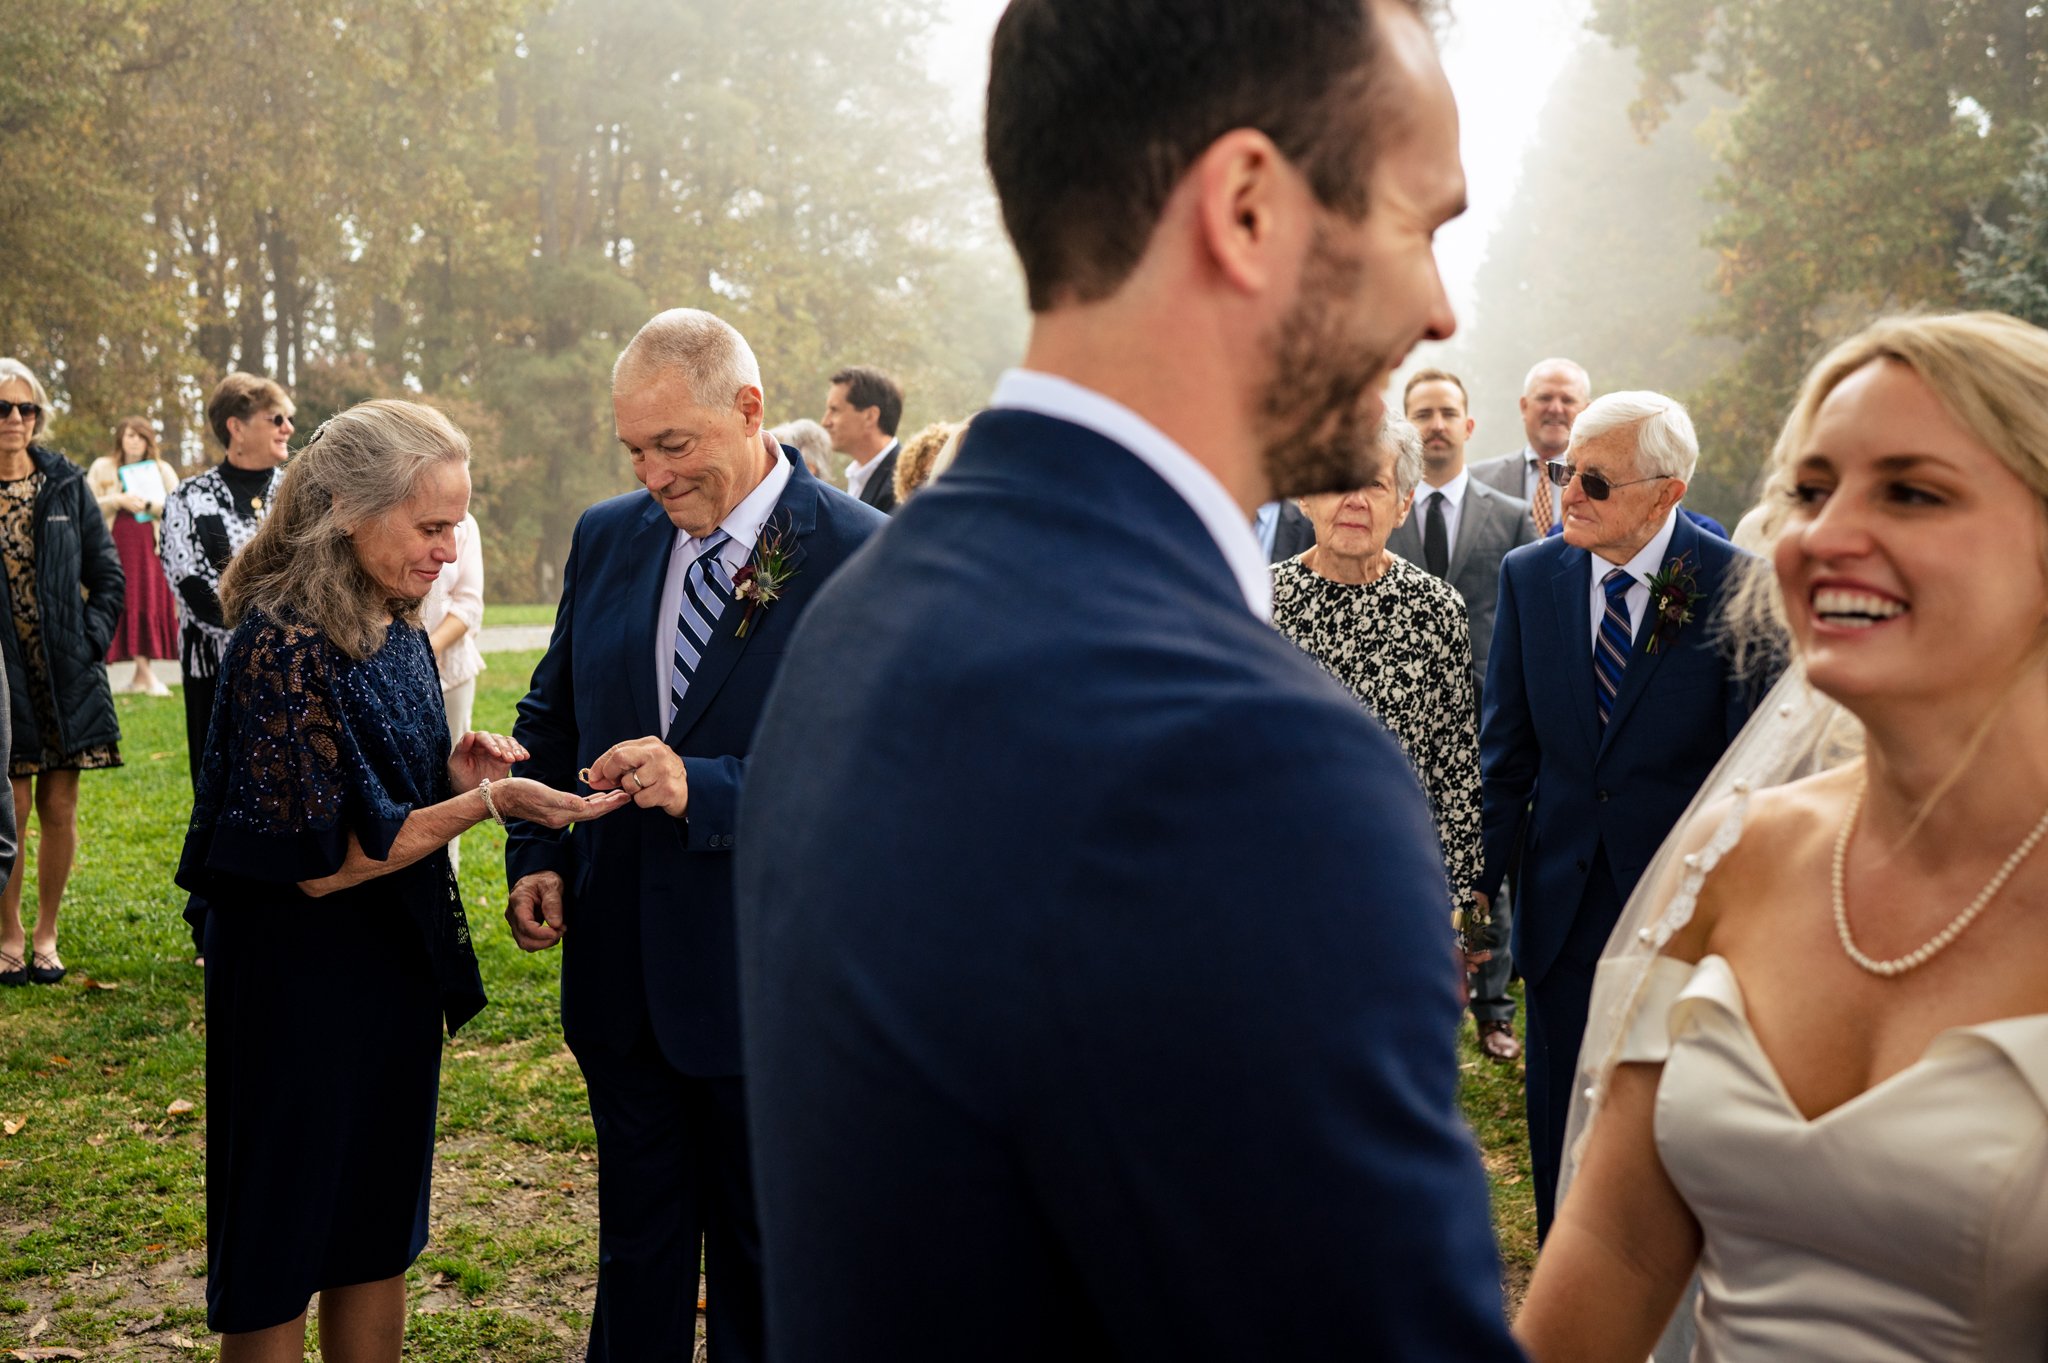 A bride and groom in Greensboro, North Carolina exchange their vows at their wedding ceremony, while a wedding photographer captures the special moments.